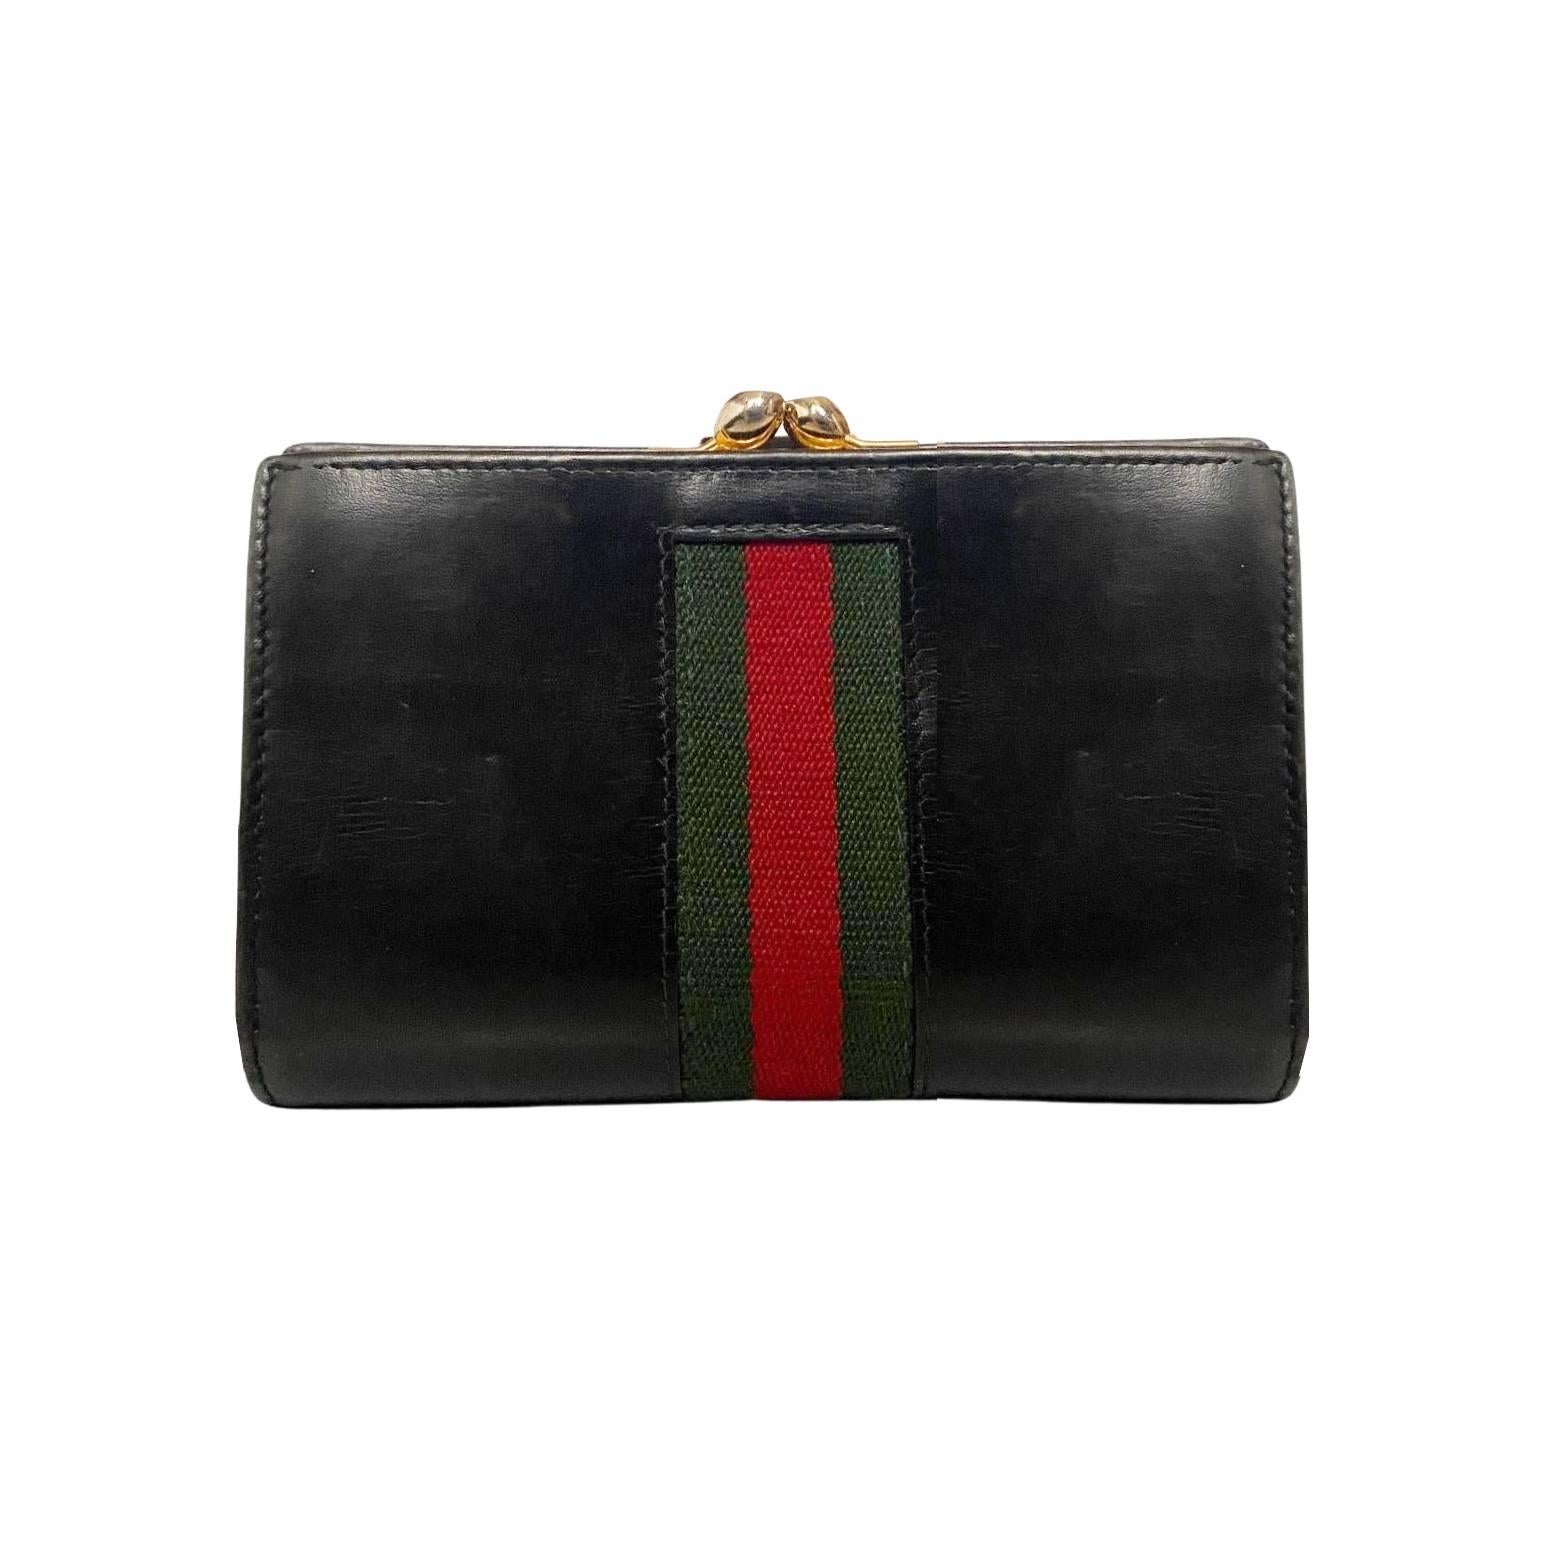 1980s Gucci web wallet, black leather, gold tone metalware, top clutch closure, side compartments, coin compartments, Made in Italy A timeless classic, it's a luxurious addition to any wardrobe and will last for years to come with its durable